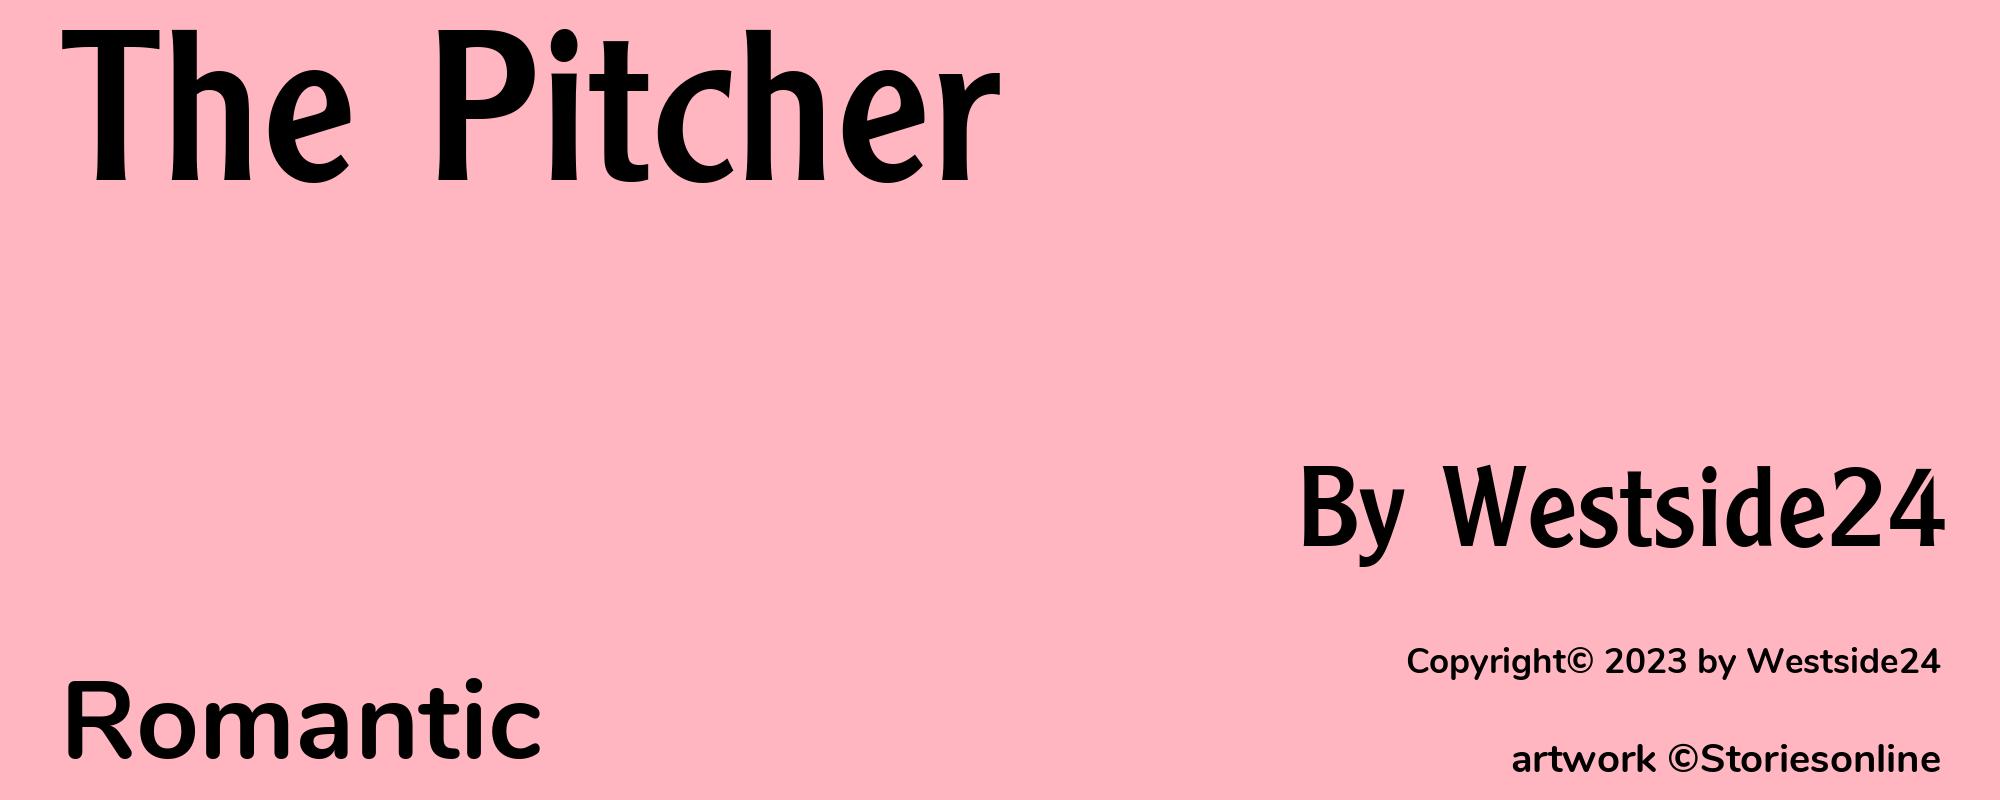 The Pitcher - Cover